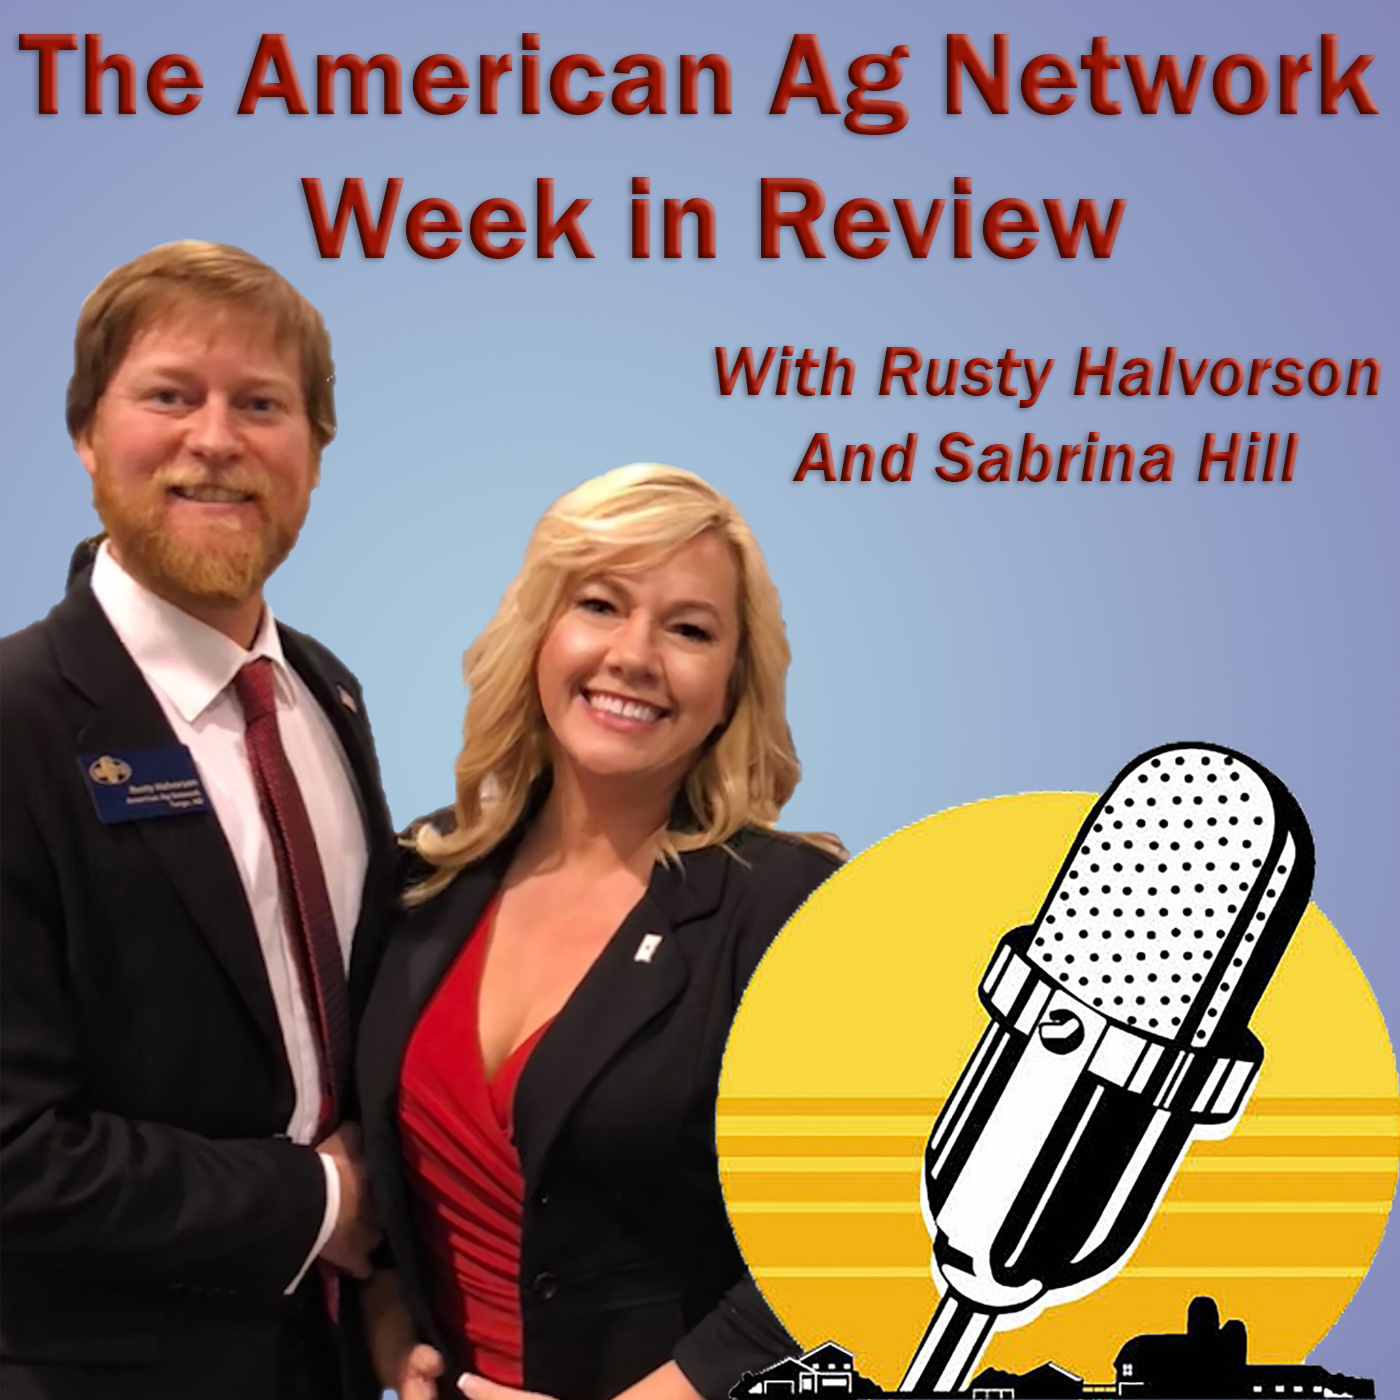 American Ag Network Week in Review for May 5